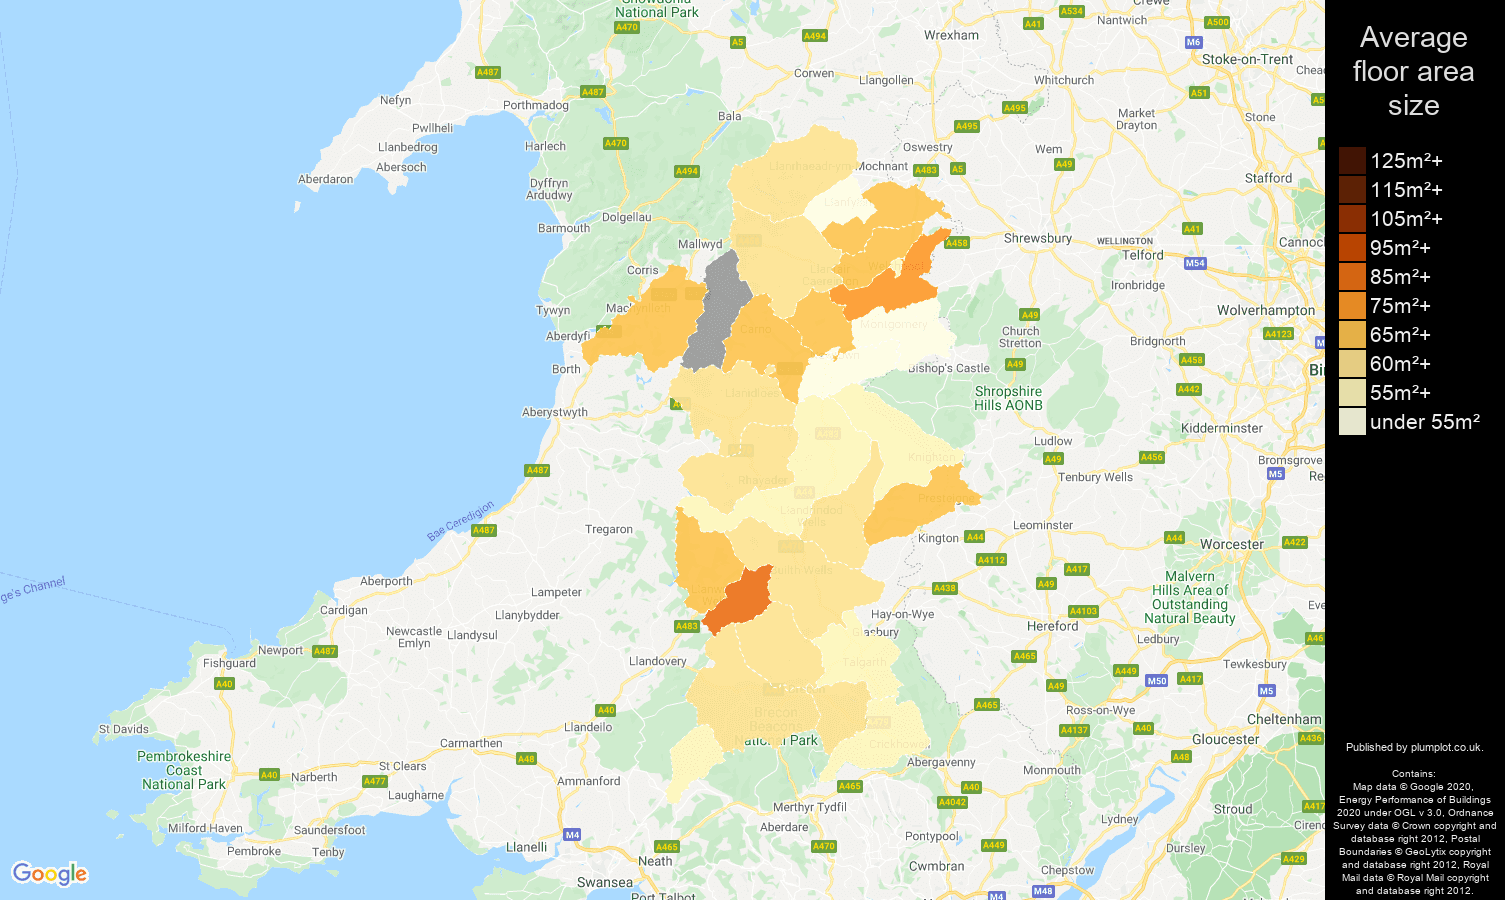 Powys map of average floor area size of flats